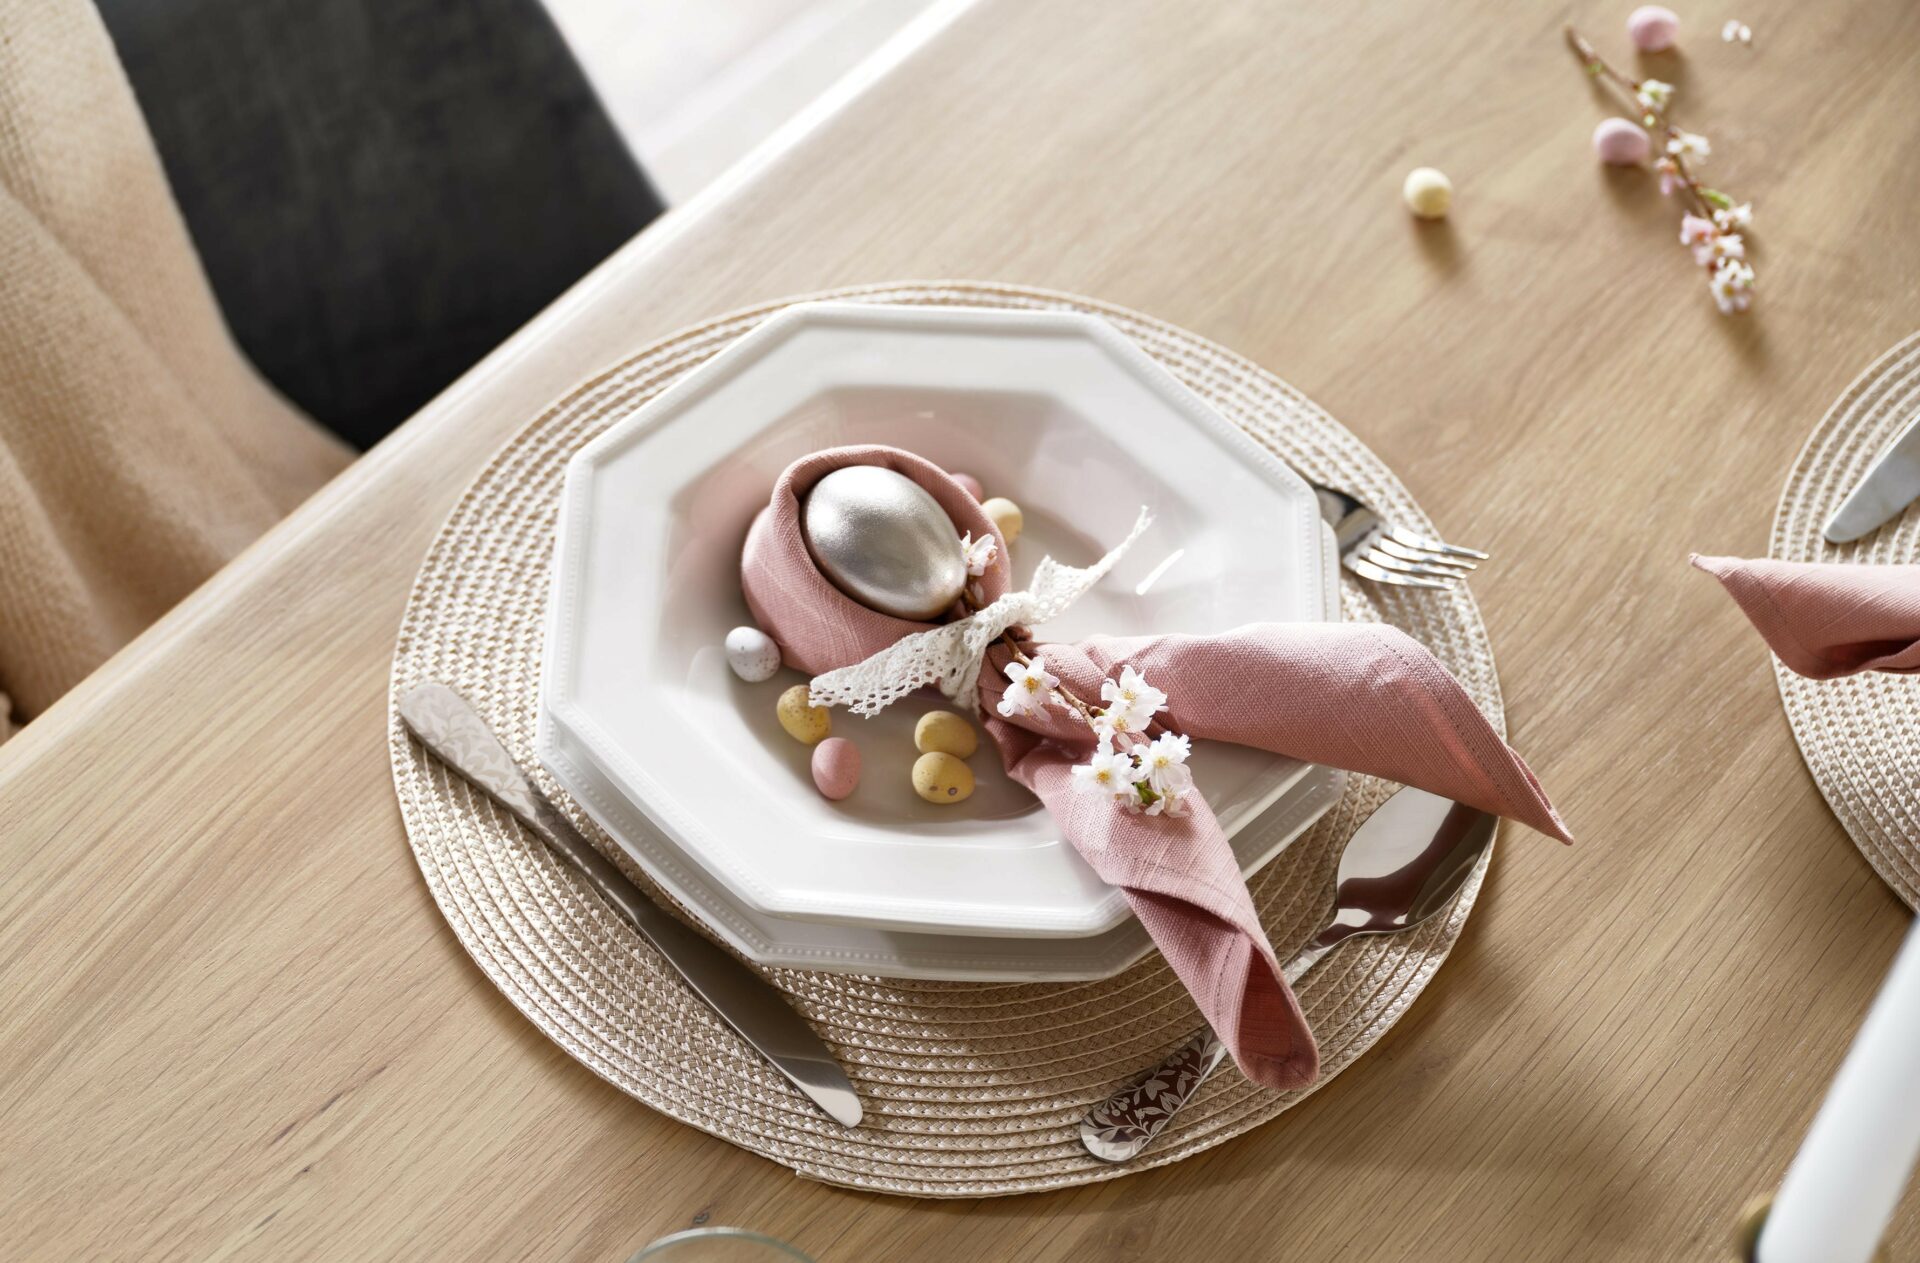 A dining table with place setting-dining furniture-wooden dining table with Easter tablescape place setting